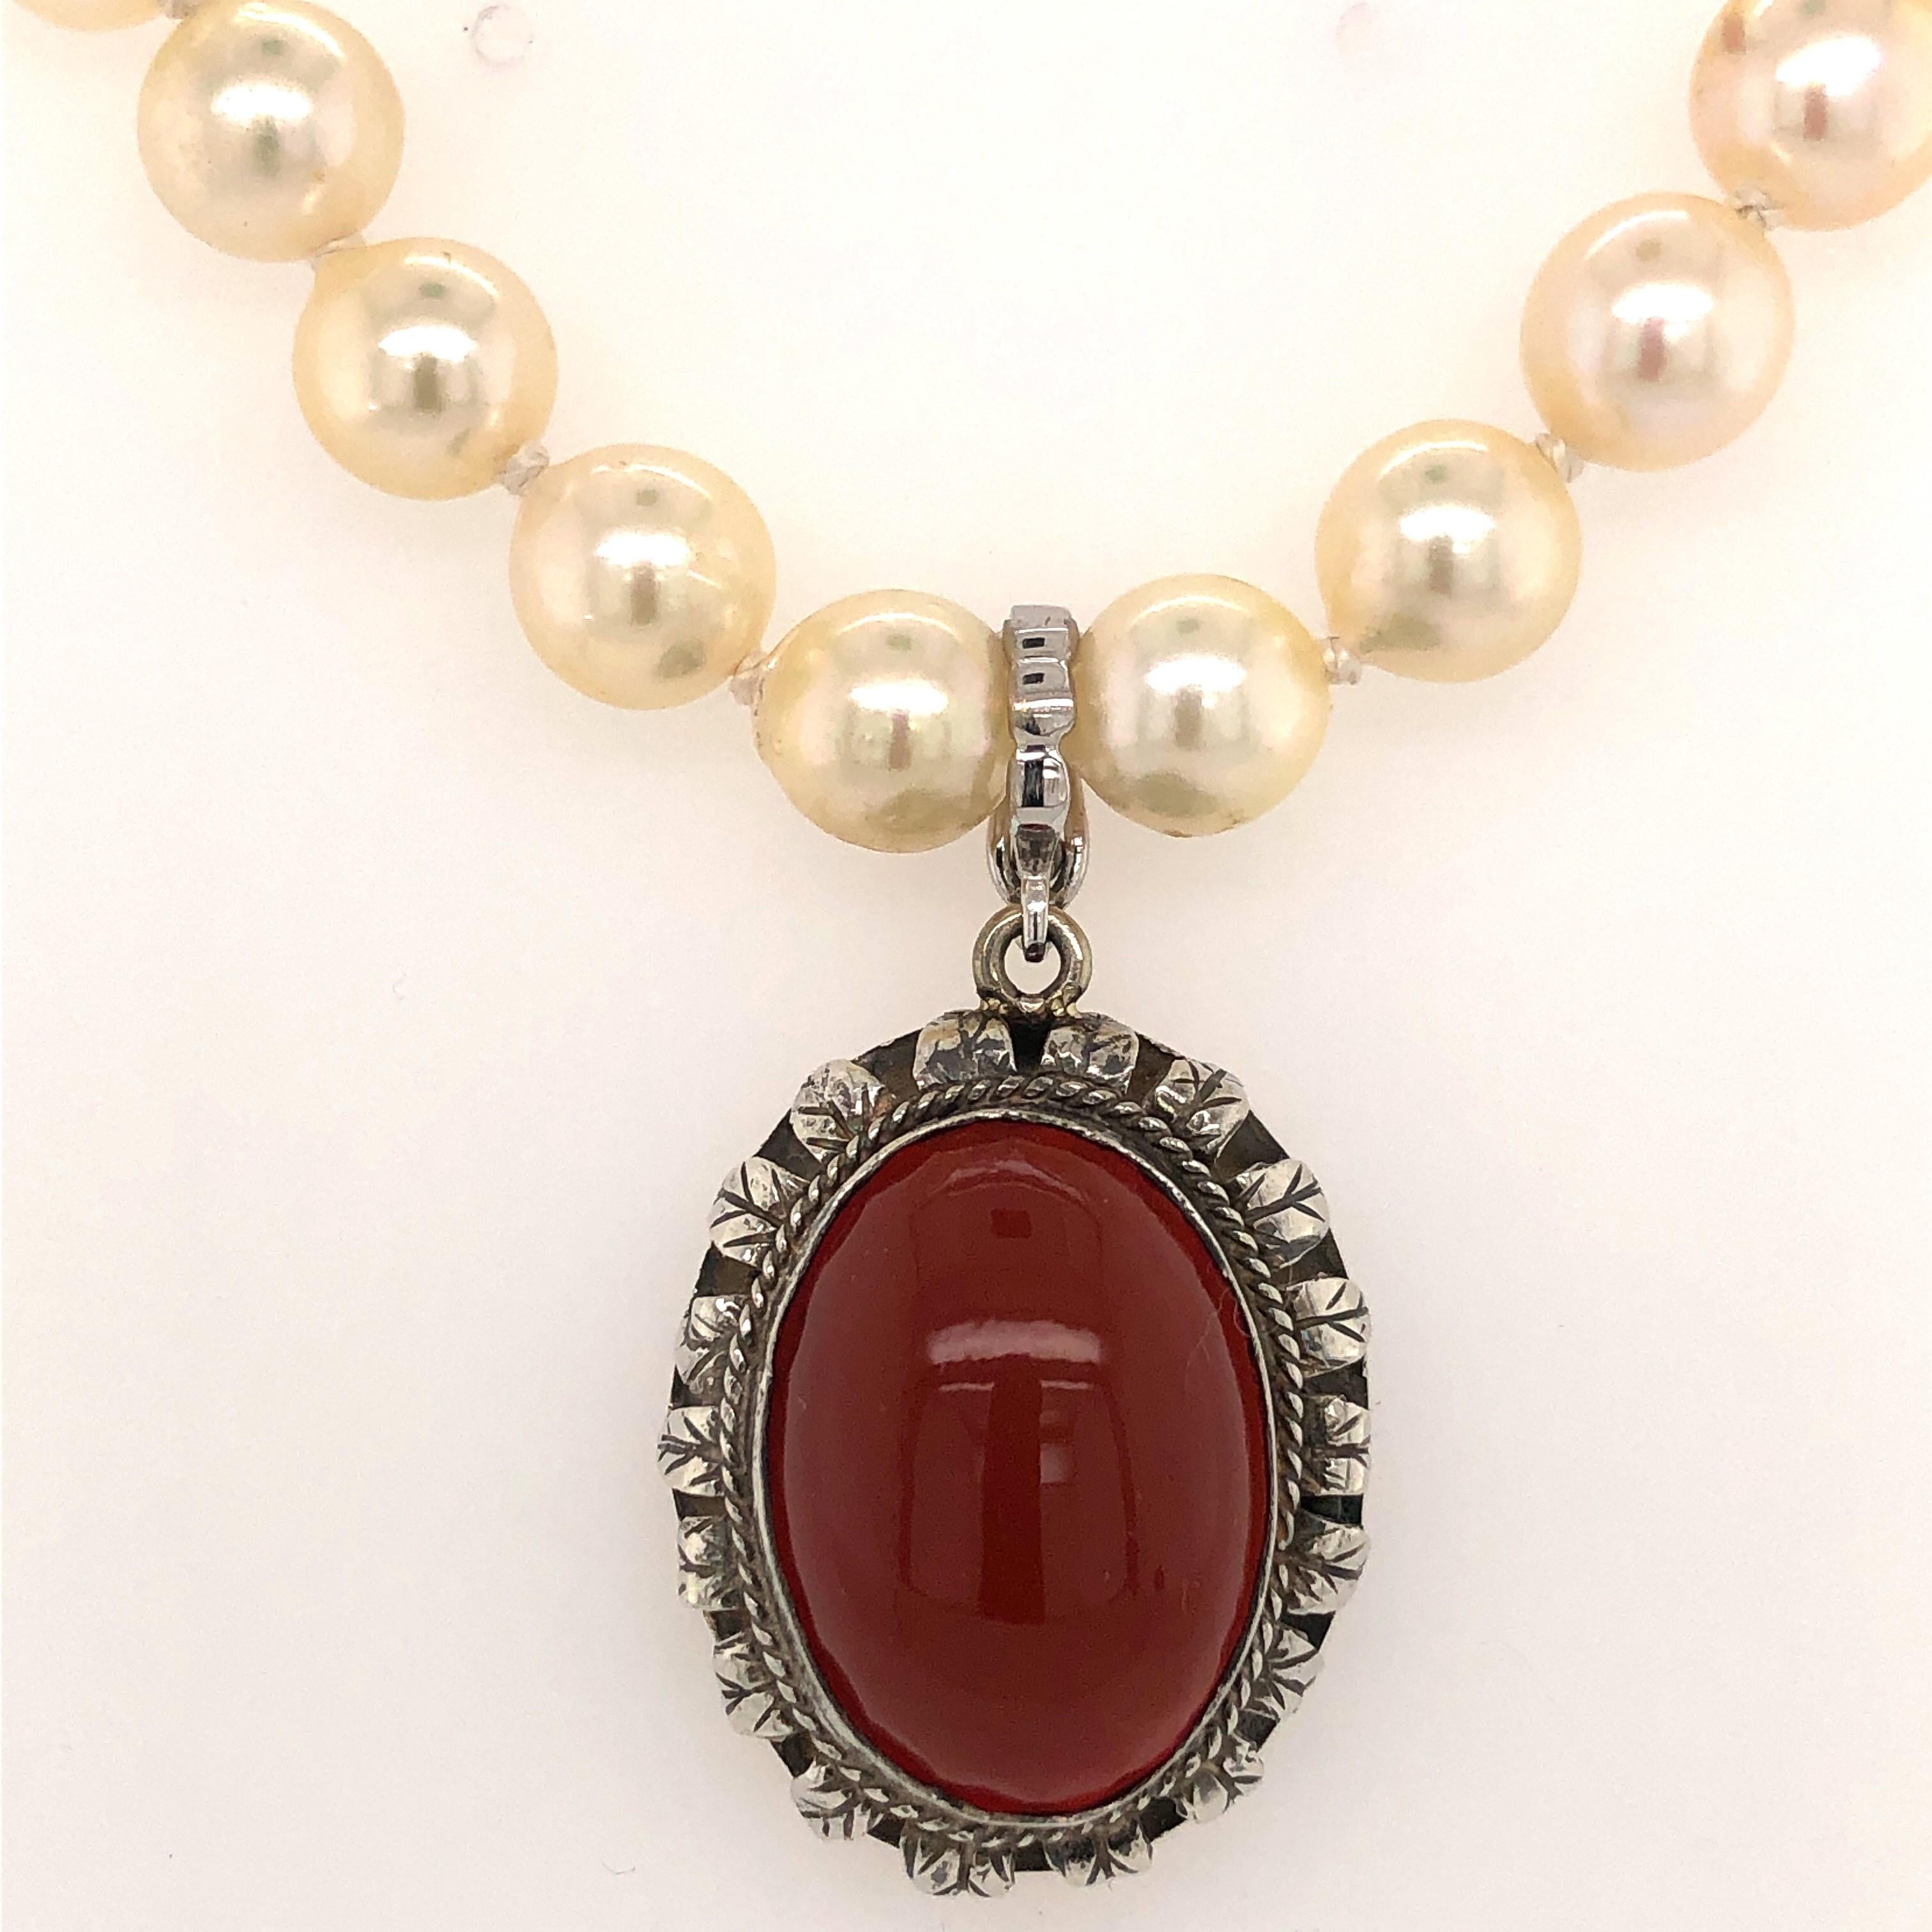 An earthy oval carnelian cabochon measuring 17 x 13 mm is bezel set in a frame of hand crafted sterling silver to create this vintage pendant.
Sitting pretty on a lustrous sixteen inch strand of pearls, this pendant is removable as an enhancer